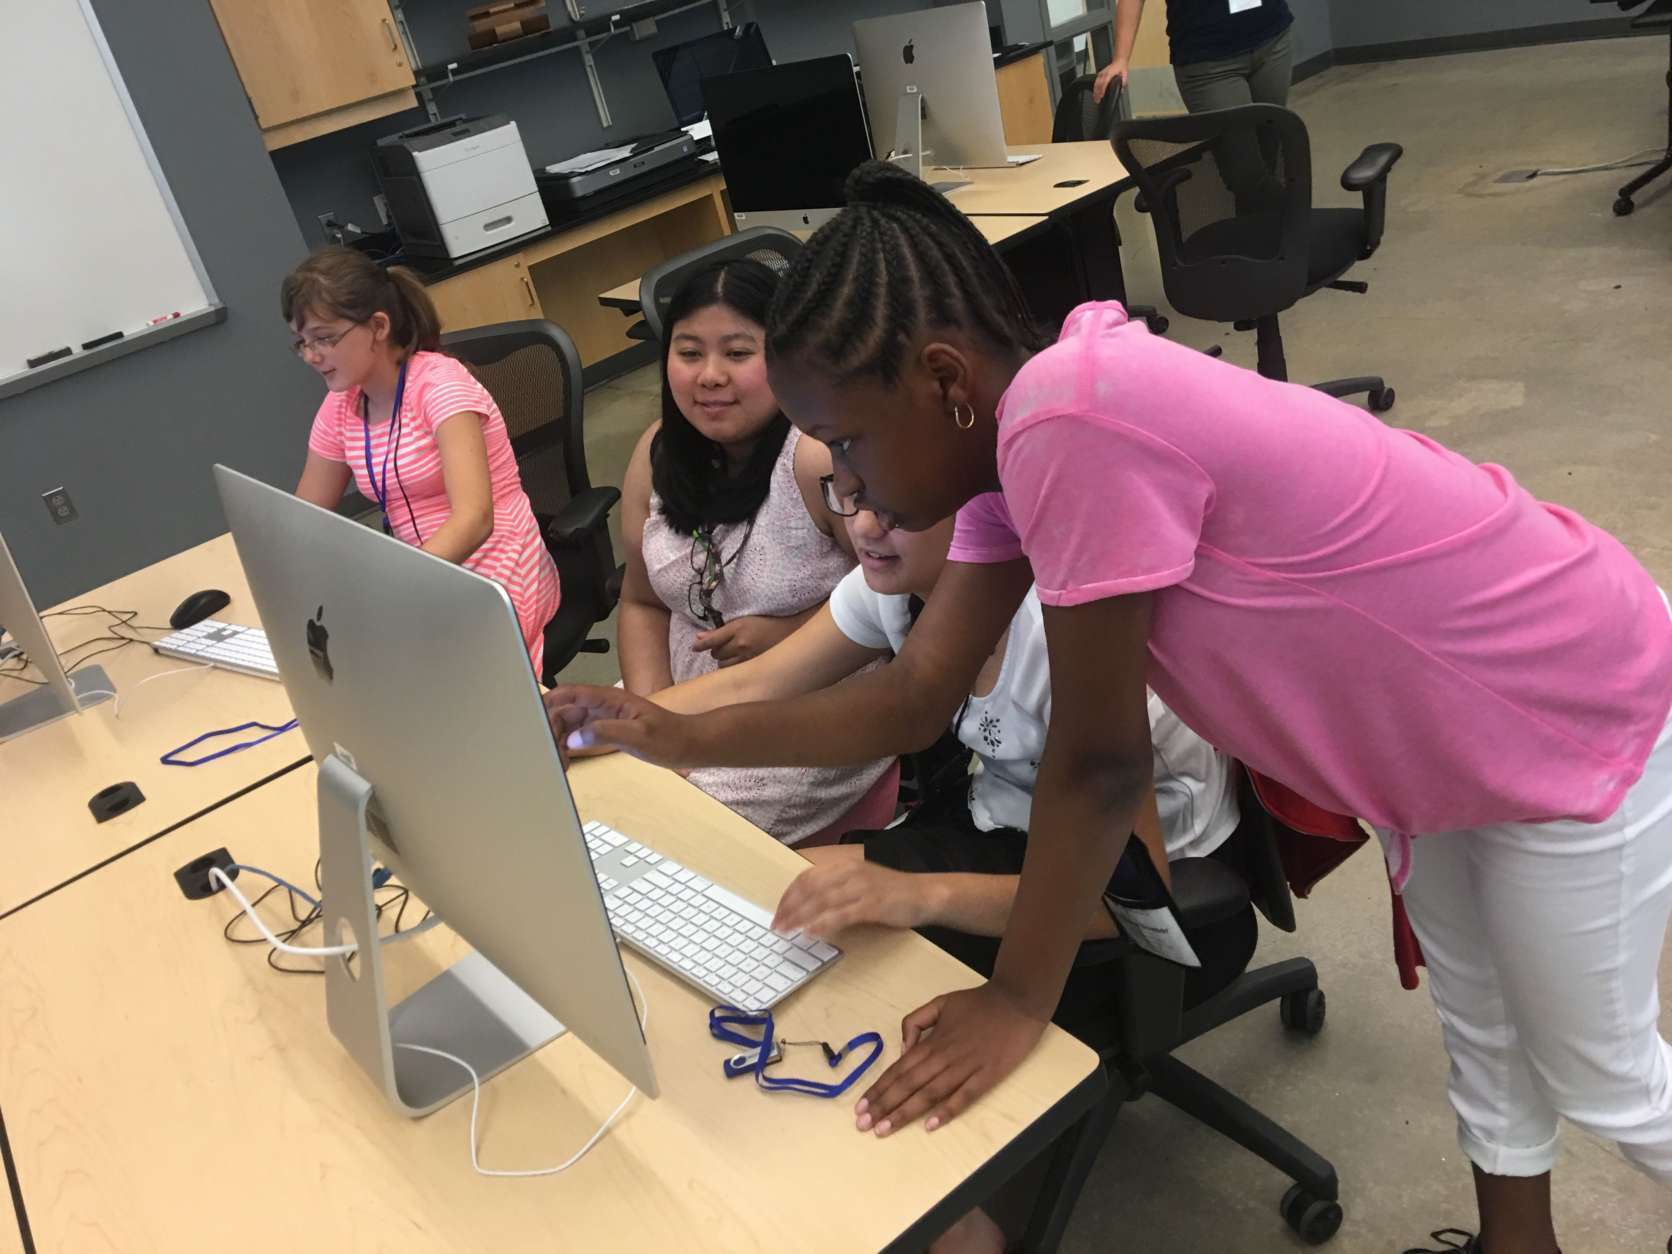 Phylisha Bower works with other girls in the class on editing their games with instructor Nina Tungjairob, who is seated in the middle. (WTOP/Kristi King)